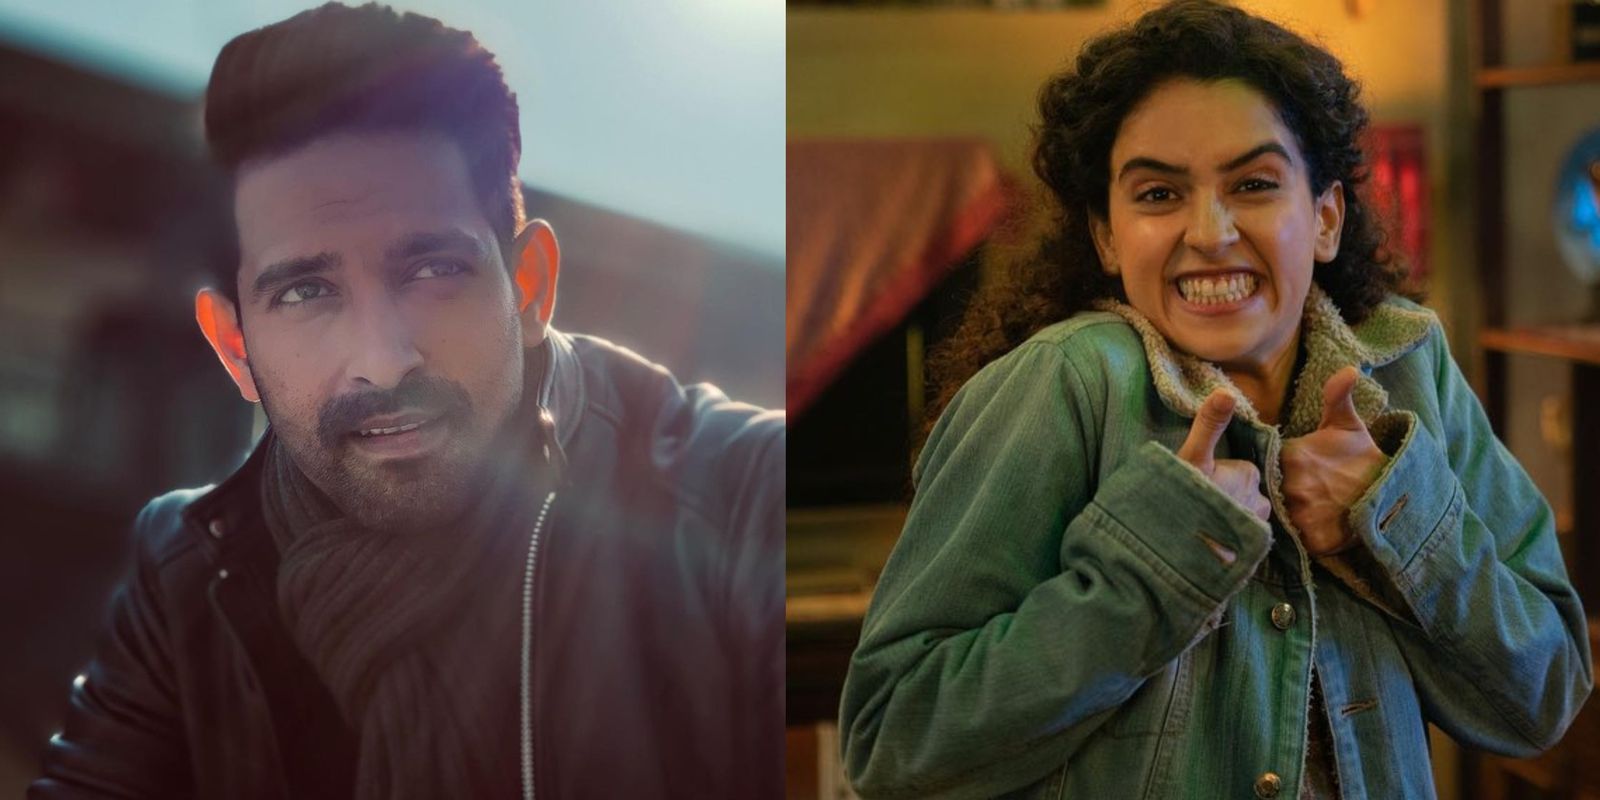 Sanya Malhotra And Vikrant Massey Are One Exciting And Talented Pair To Look Forward To